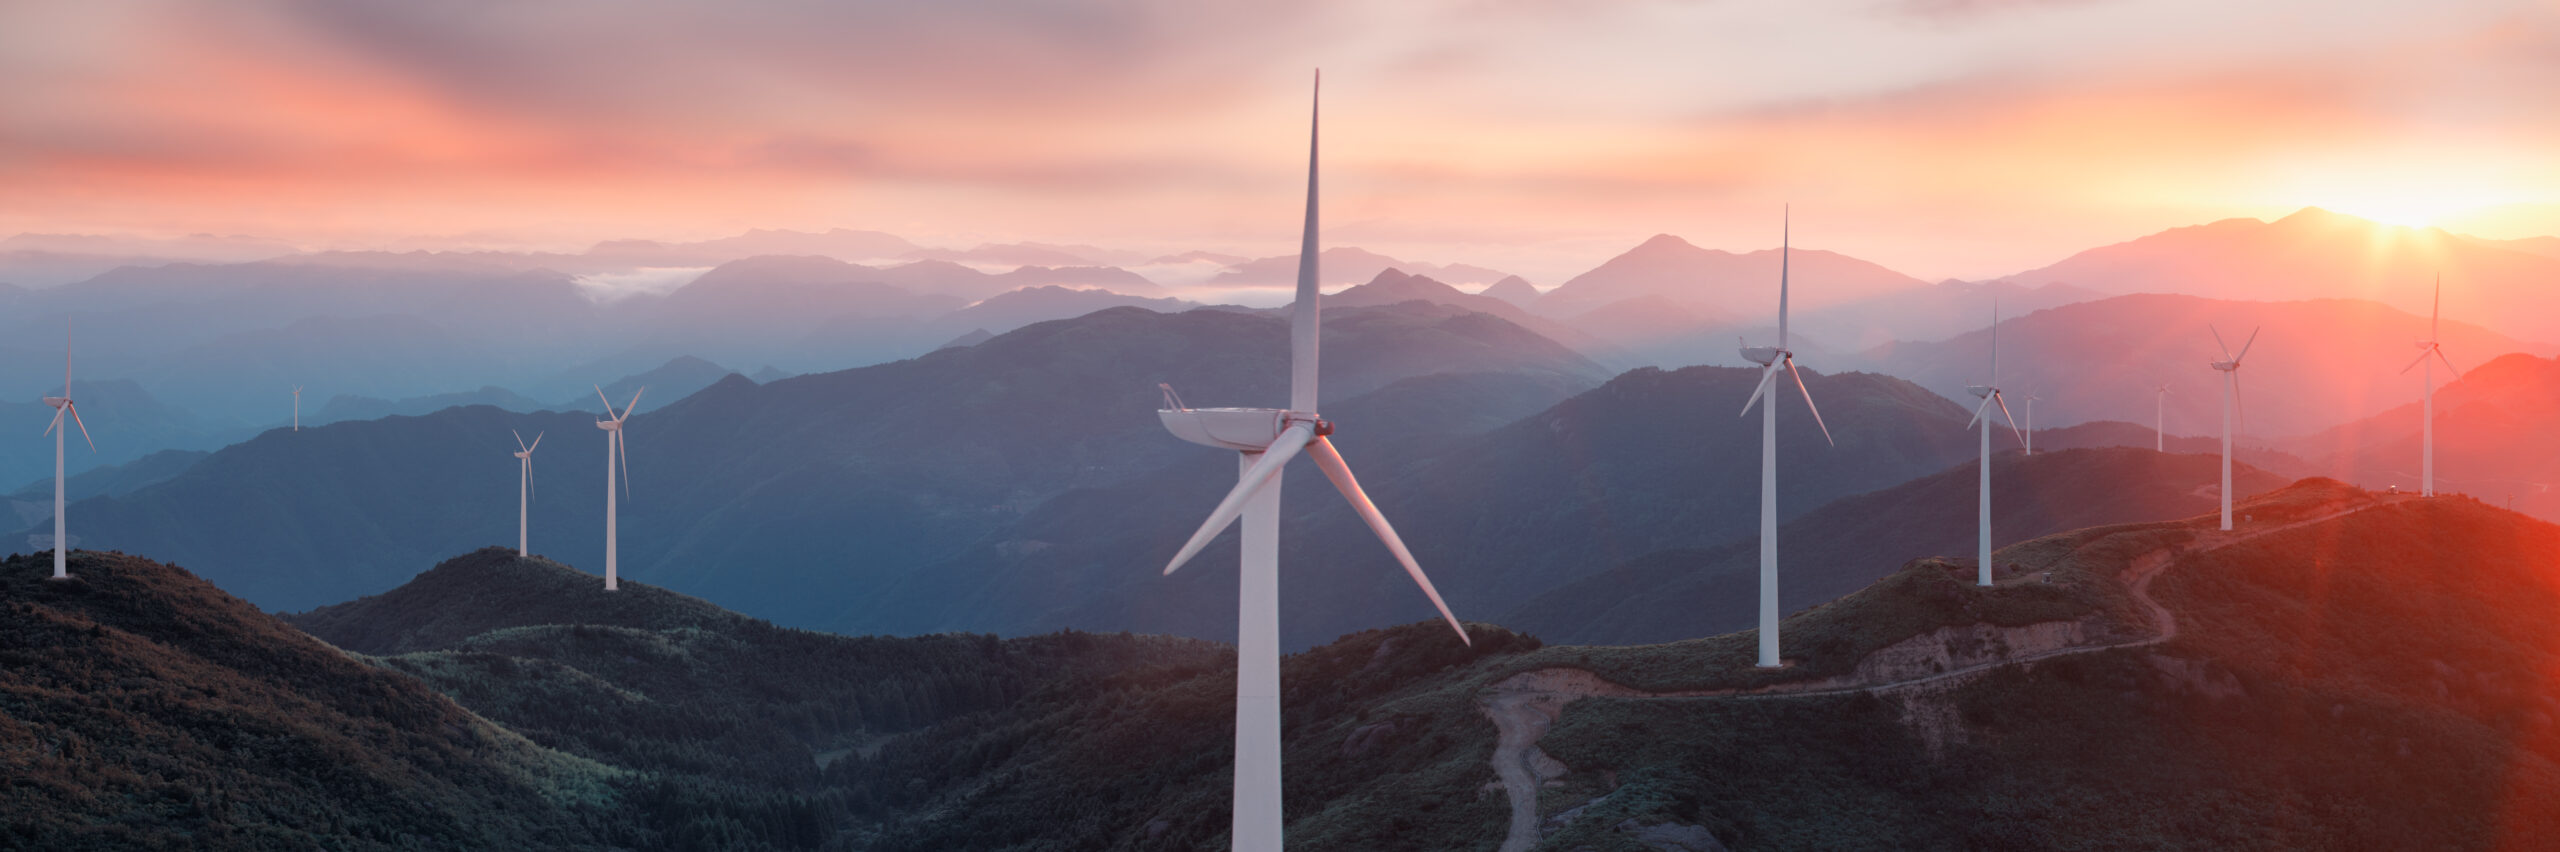 Wind turbines in the hills at sunset